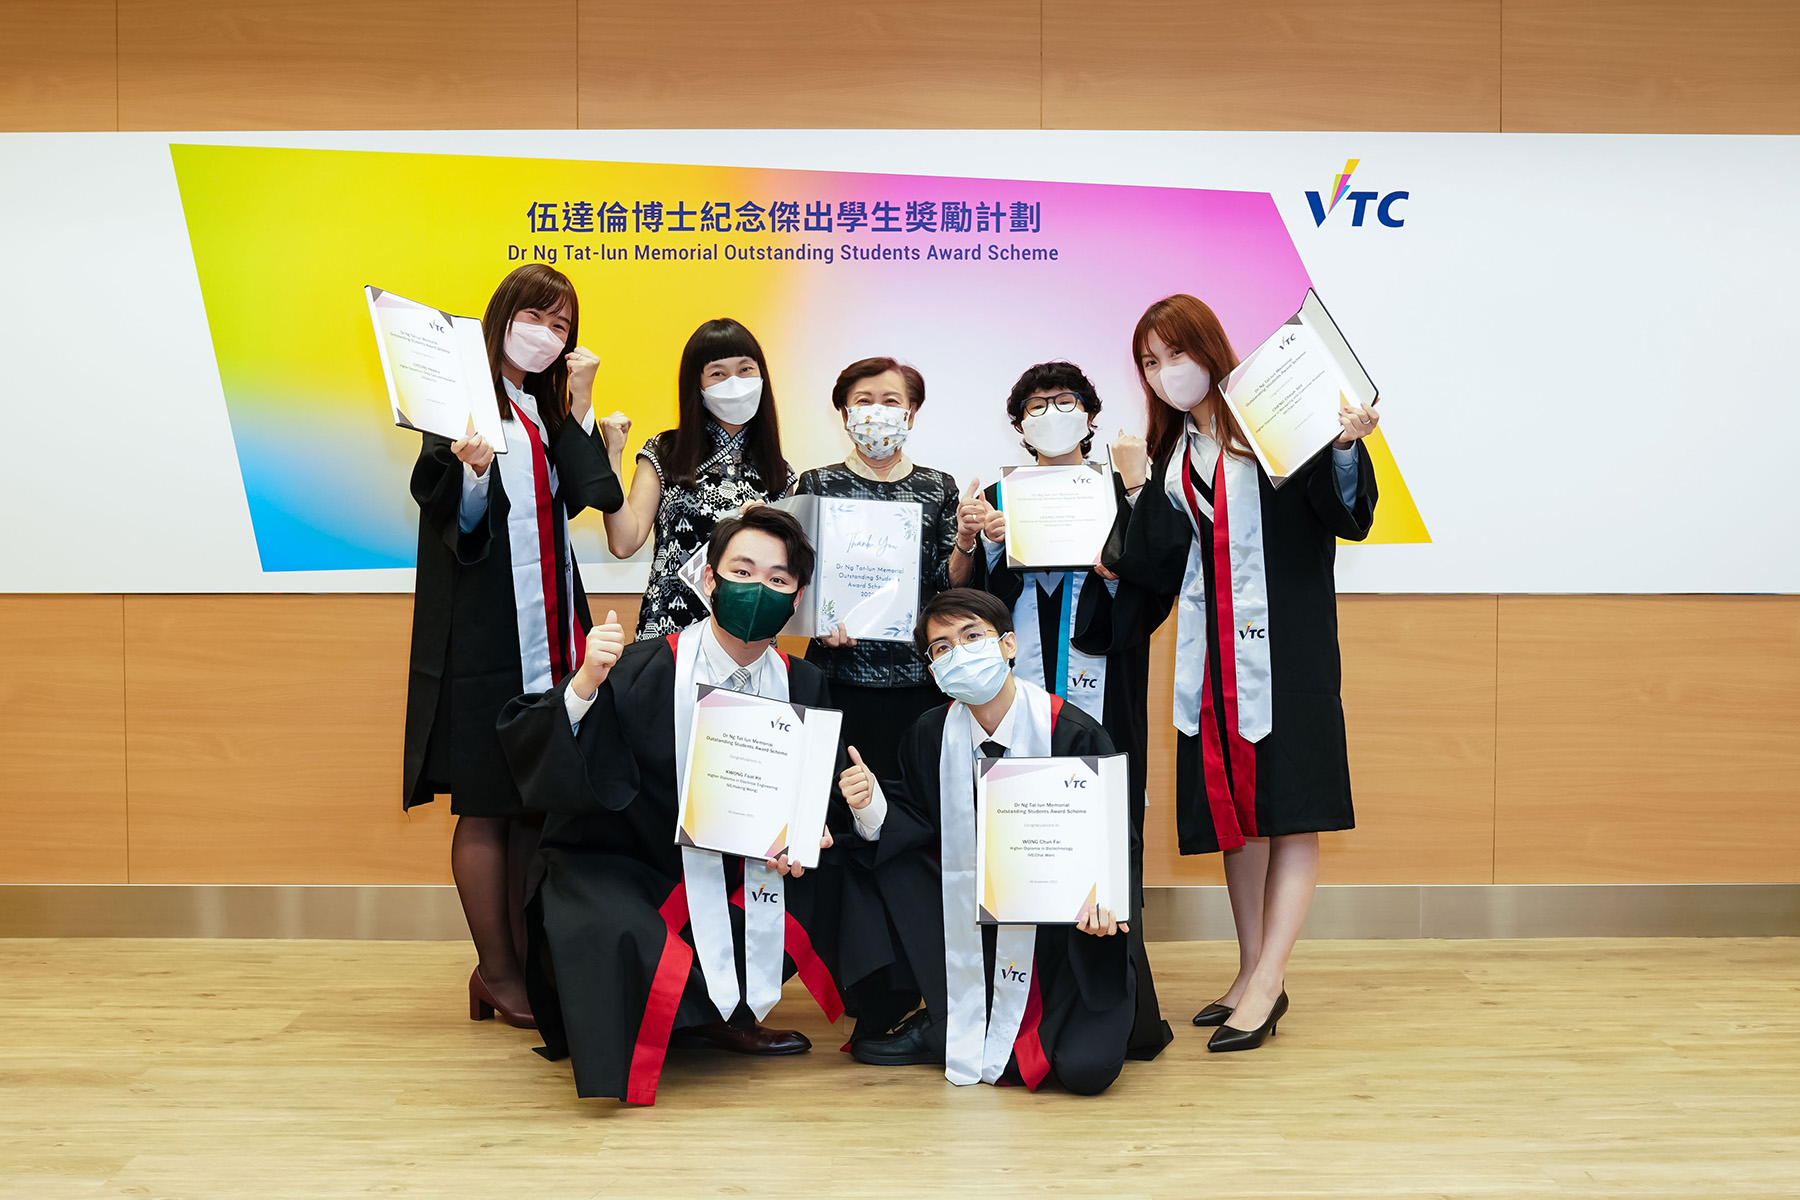 Dr Ng Tat-lun Memorial Outstanding Student Awards was presented on the same occasion. Ten outstanding students from different disciplines are honoured for their excellence in academic studies, leadership, personal attributes, extracurricular activities and community services